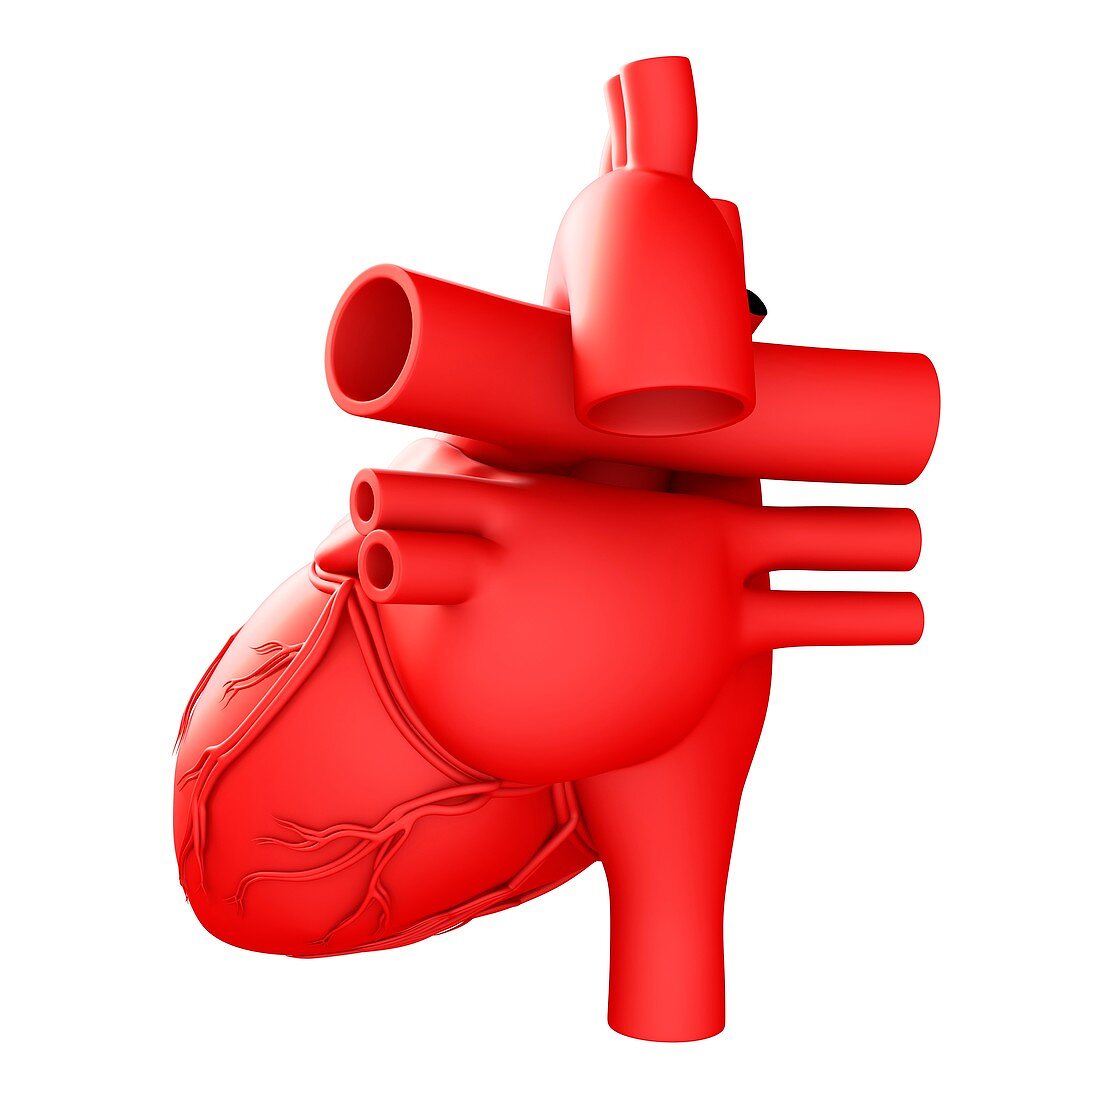 Heart anatomy and blood vessels, illustration